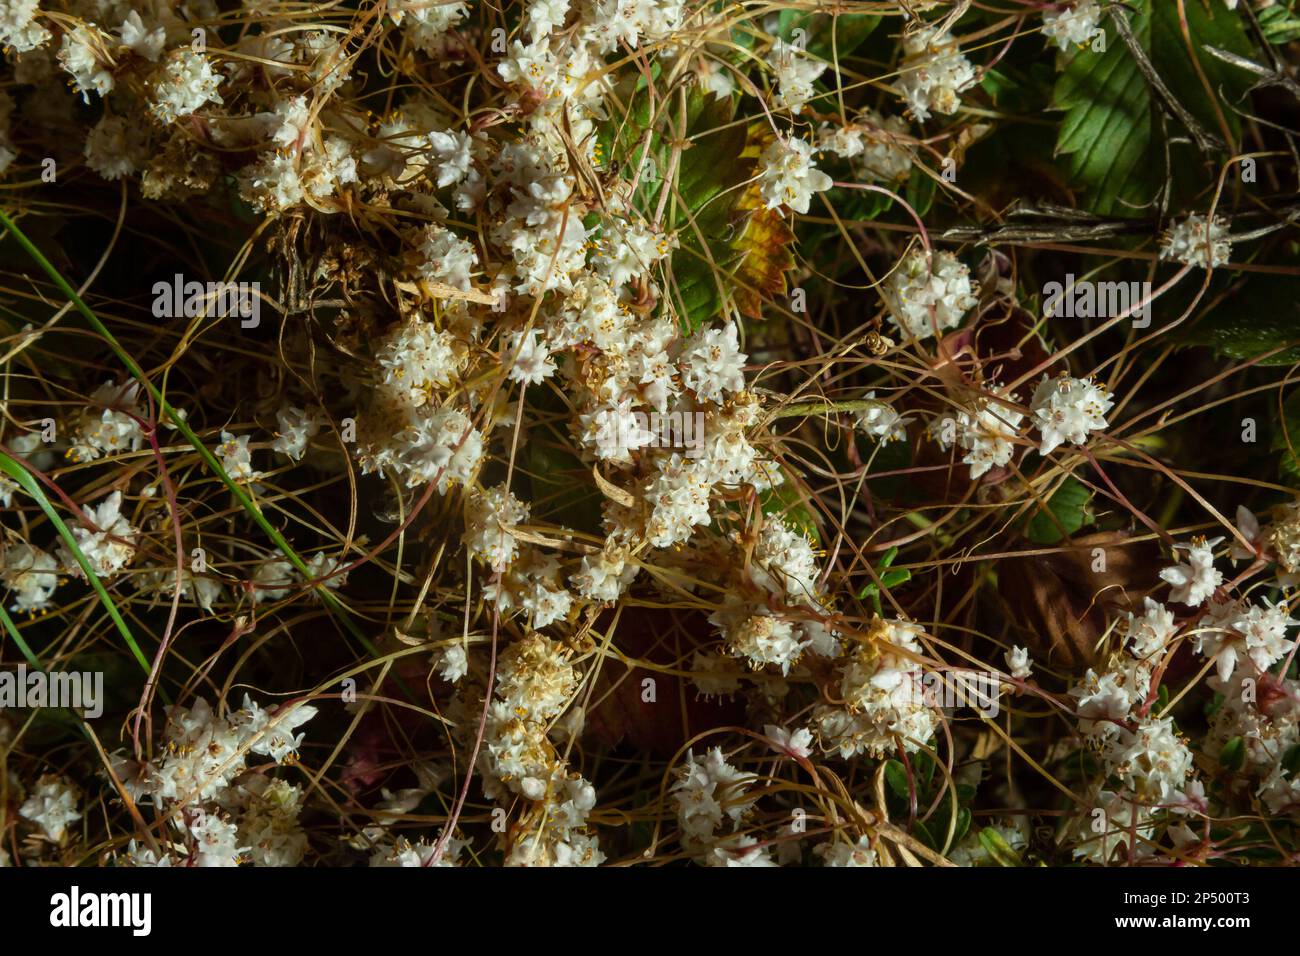 Flora of Gran Canaria - thread-like tangled stems of Cuscuta approximata aka dodder parasitic plant natural macro floral background. Stock Photo